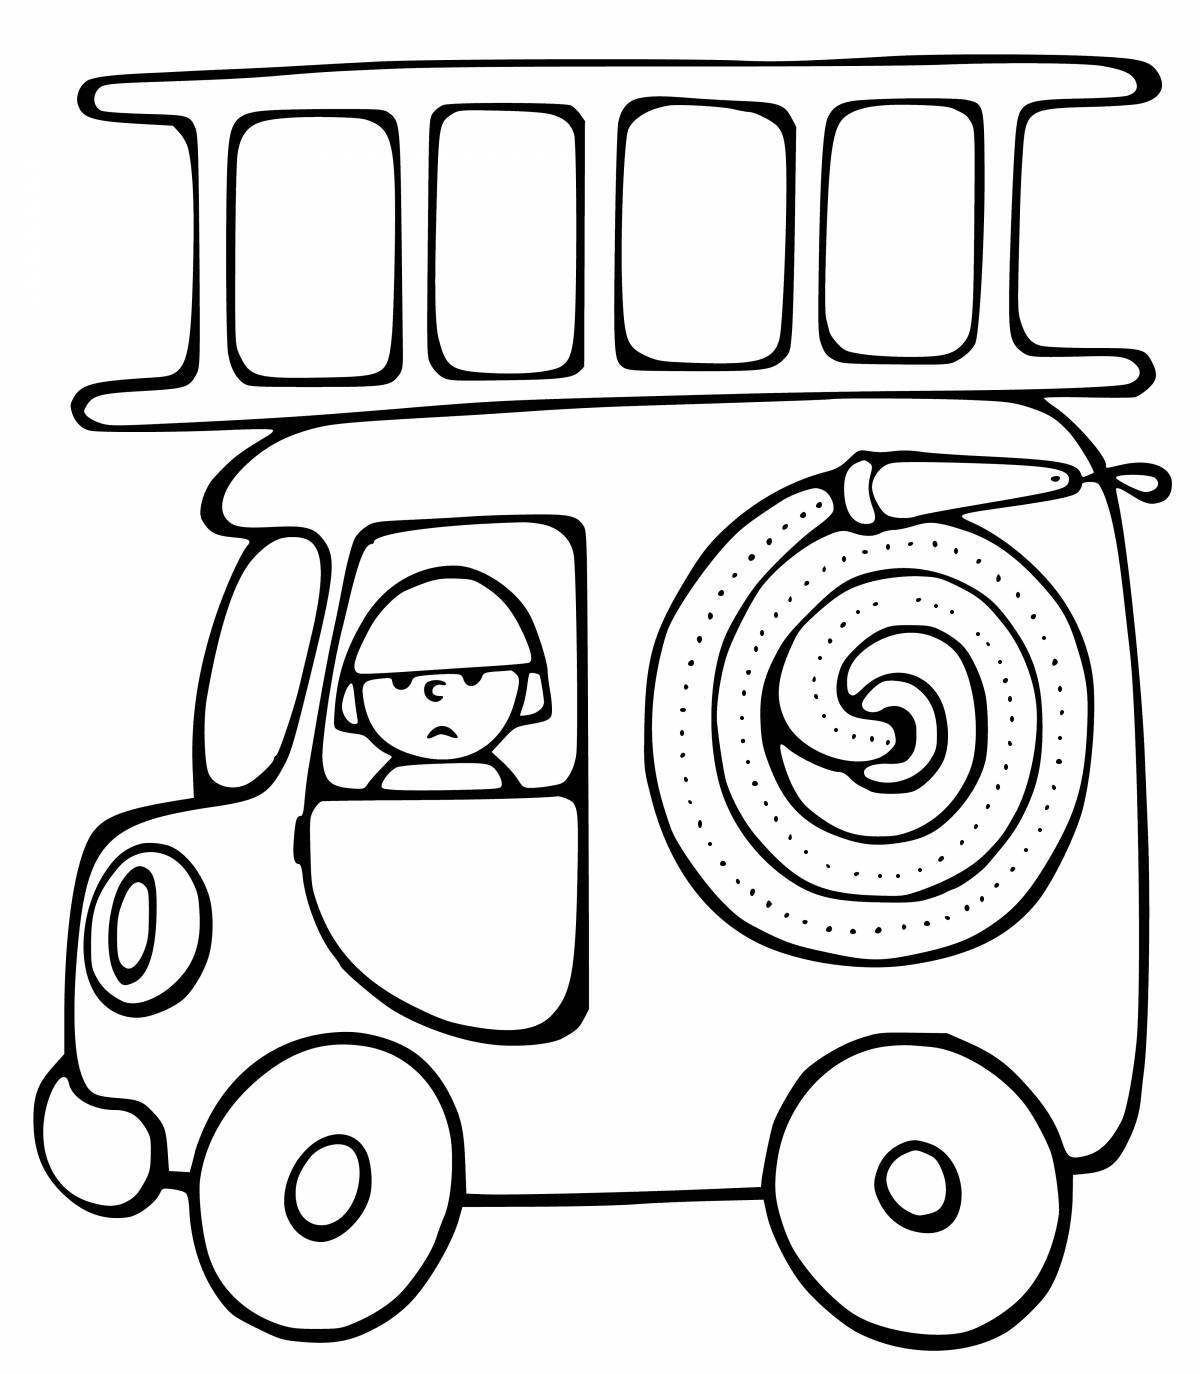 Funny fire truck coloring for kids